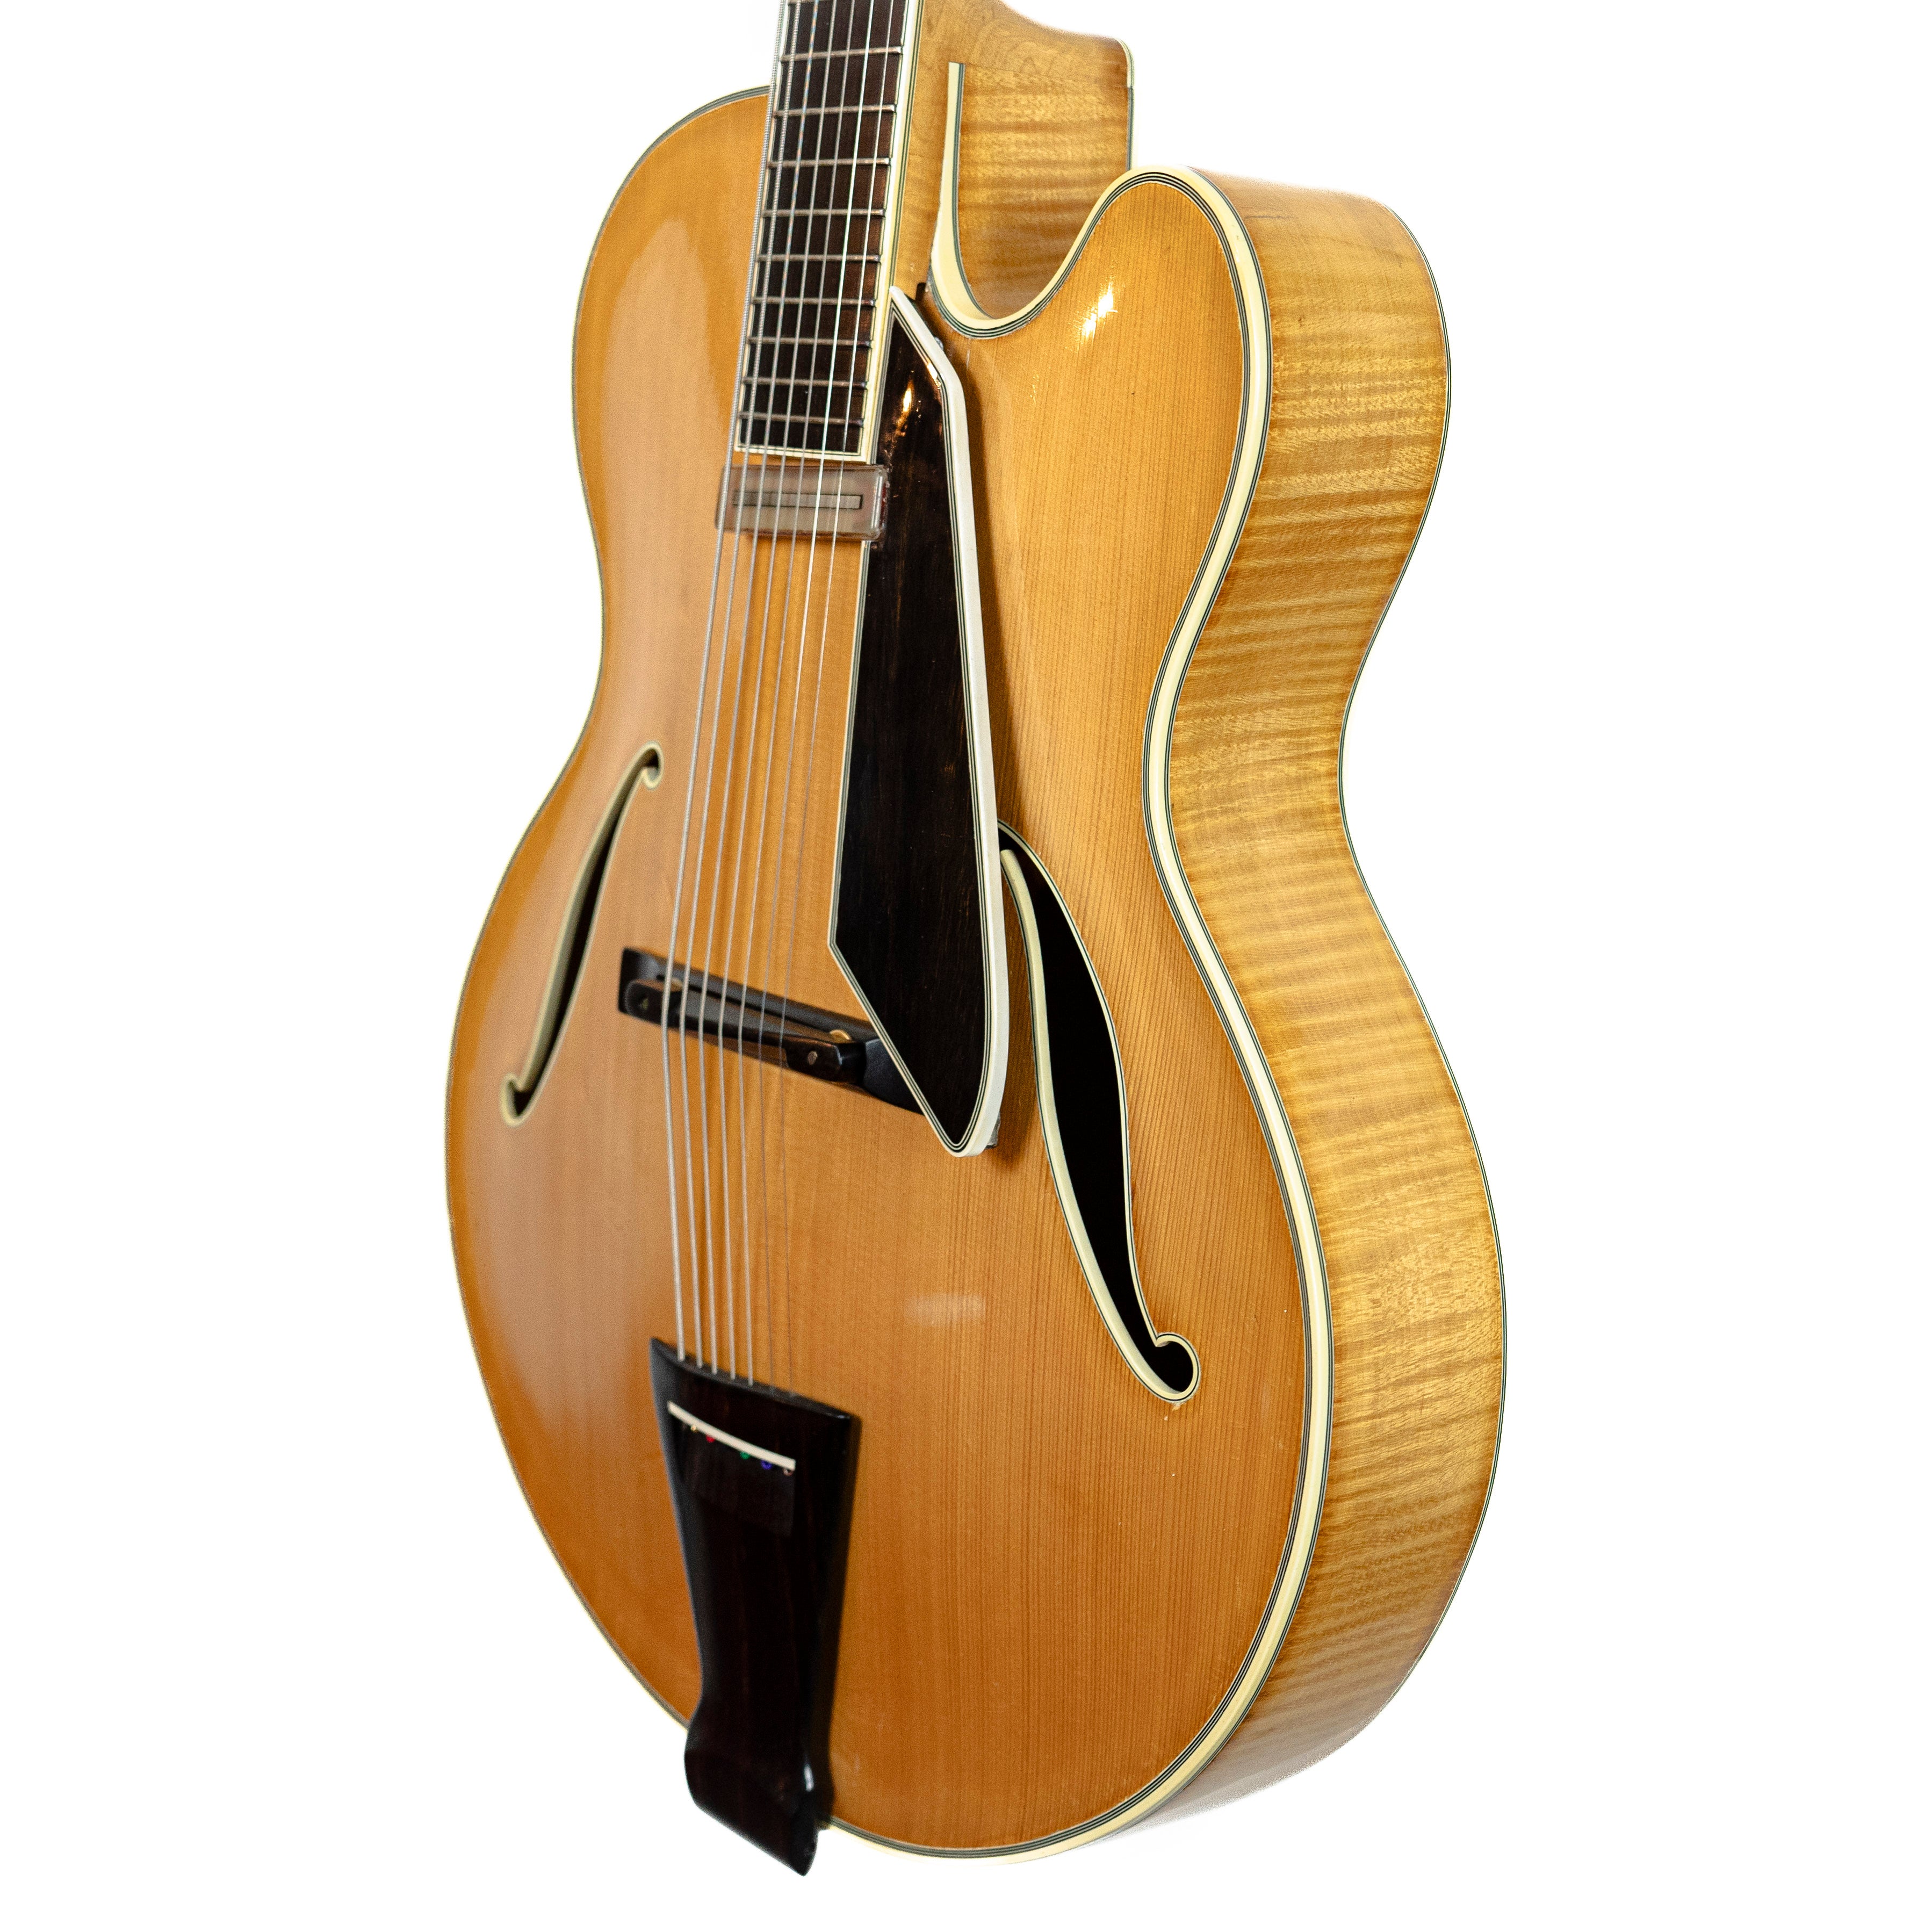 D'Aquisto 1980 New Yorker Deluxe 7-string 18" Archtop #1140